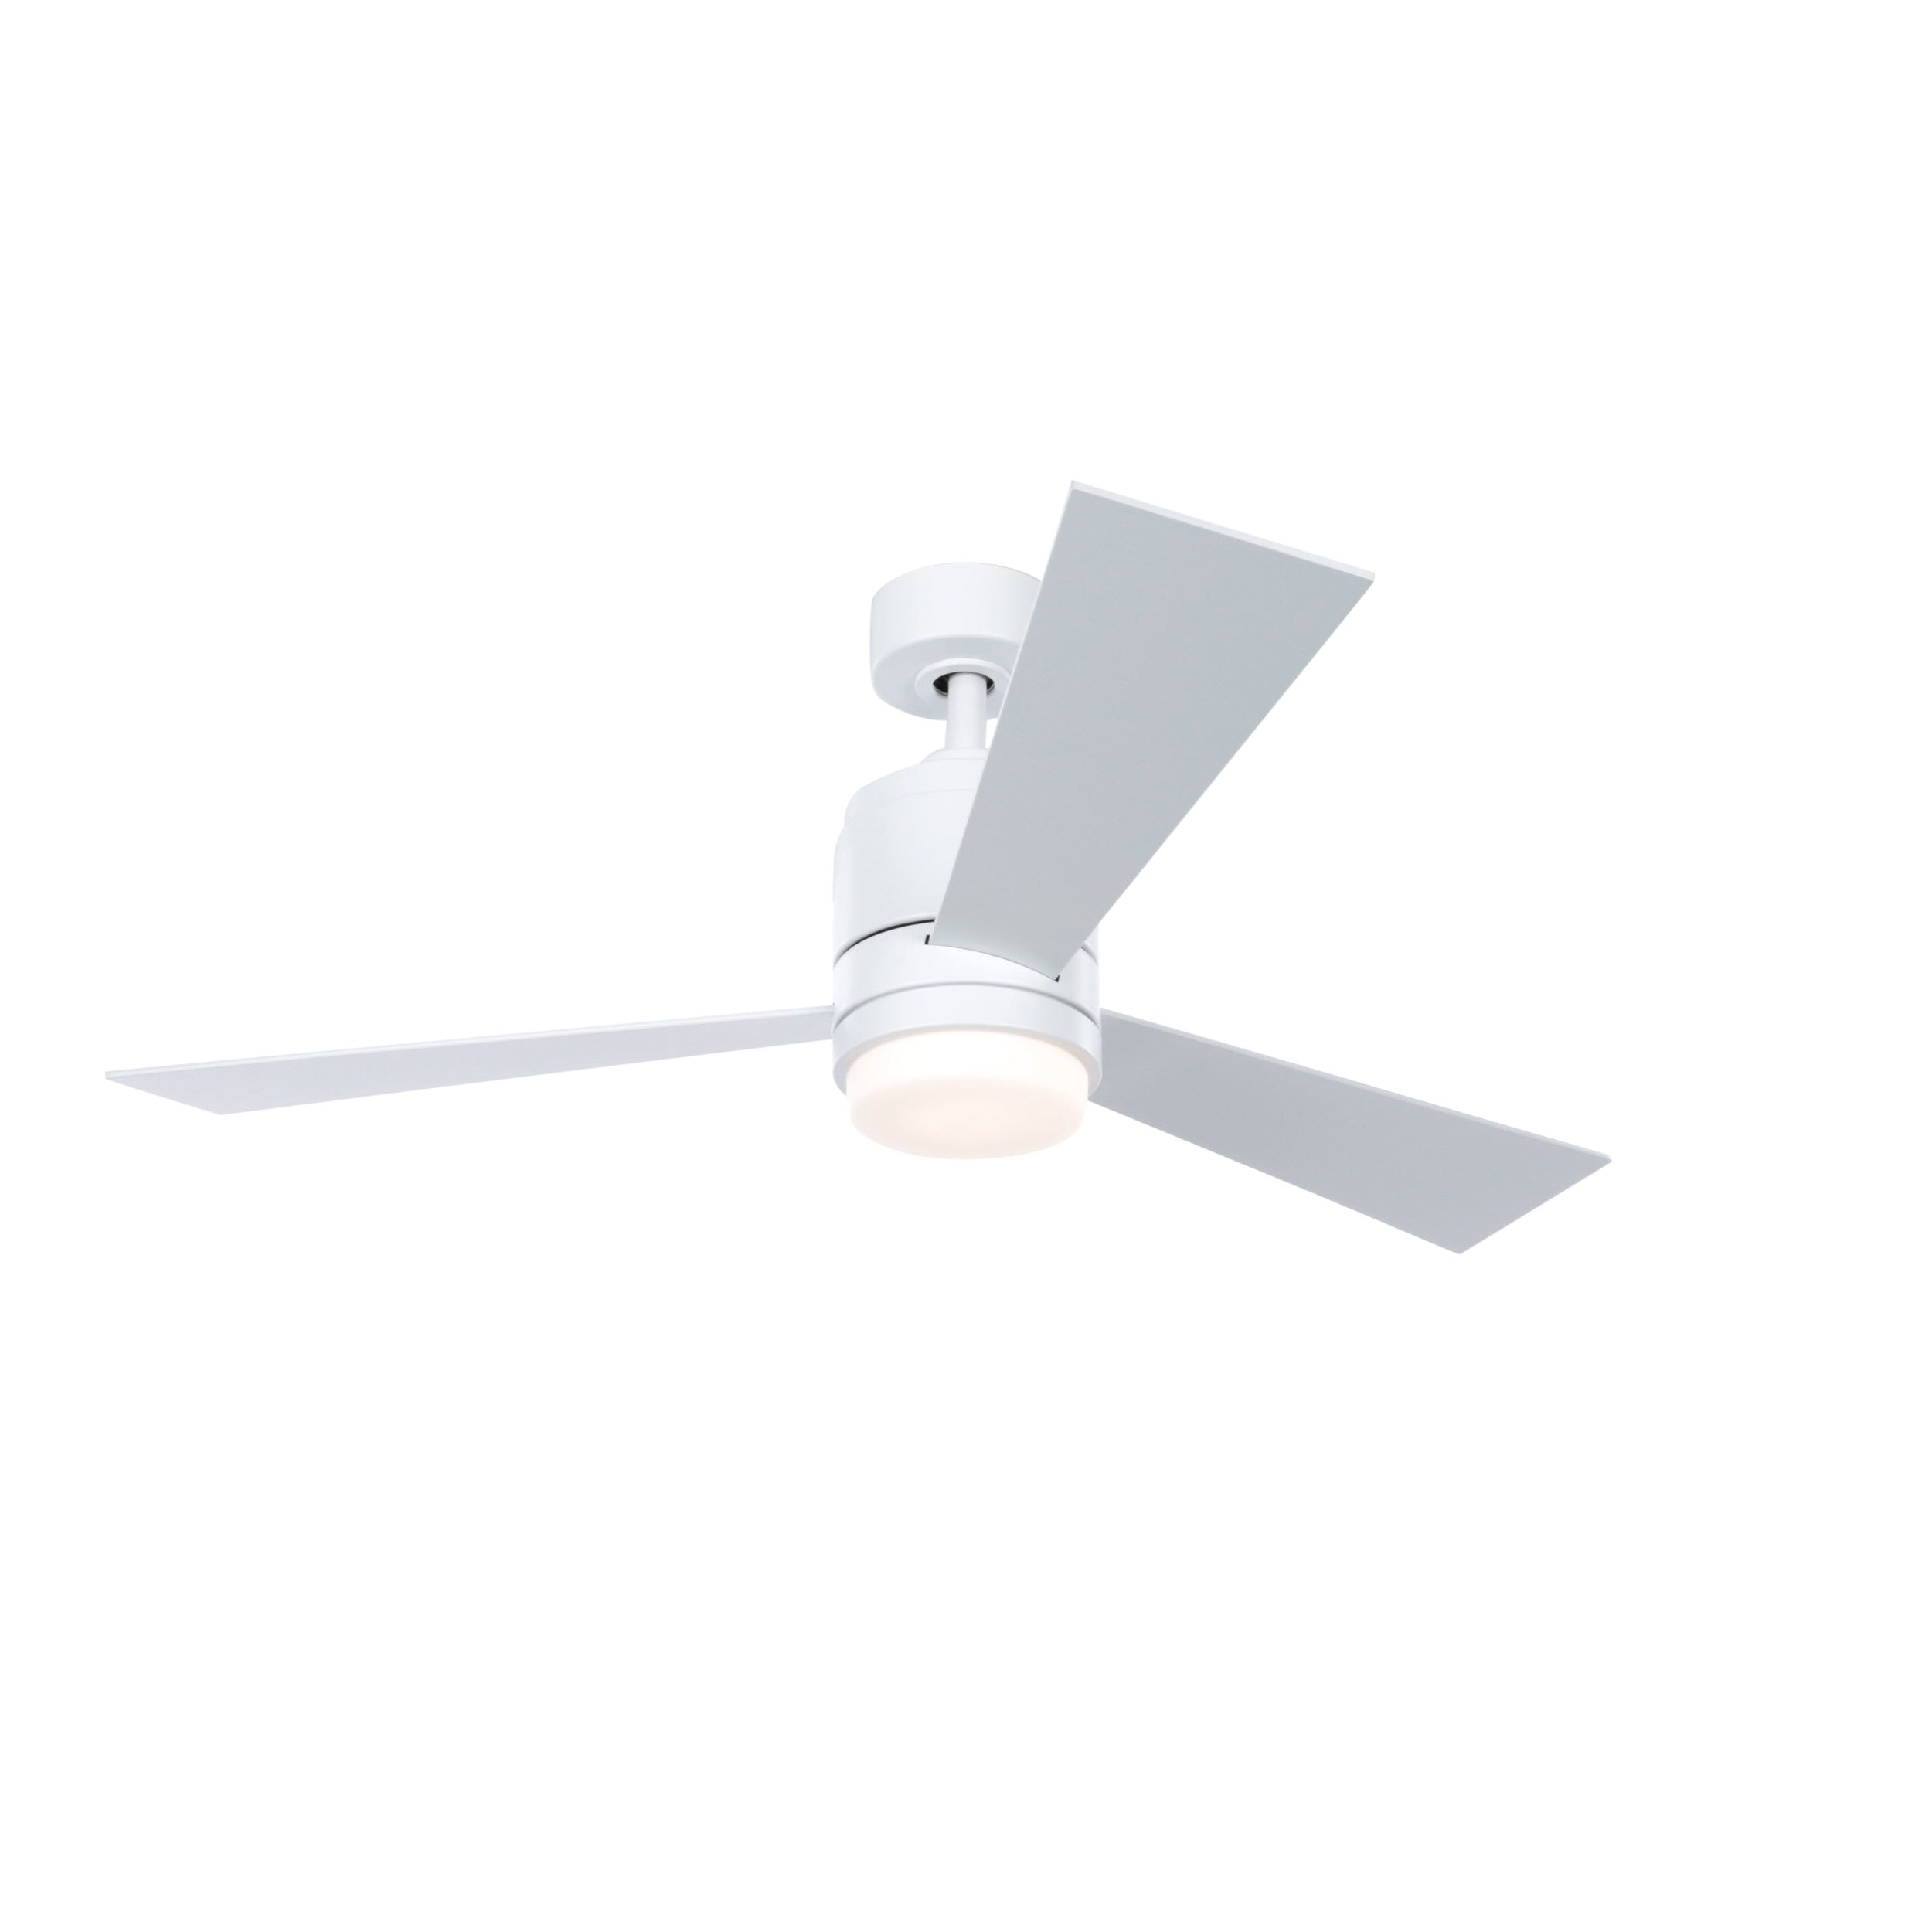 201. Ceiling Fan Blade with Mounting Bracket and Screws 